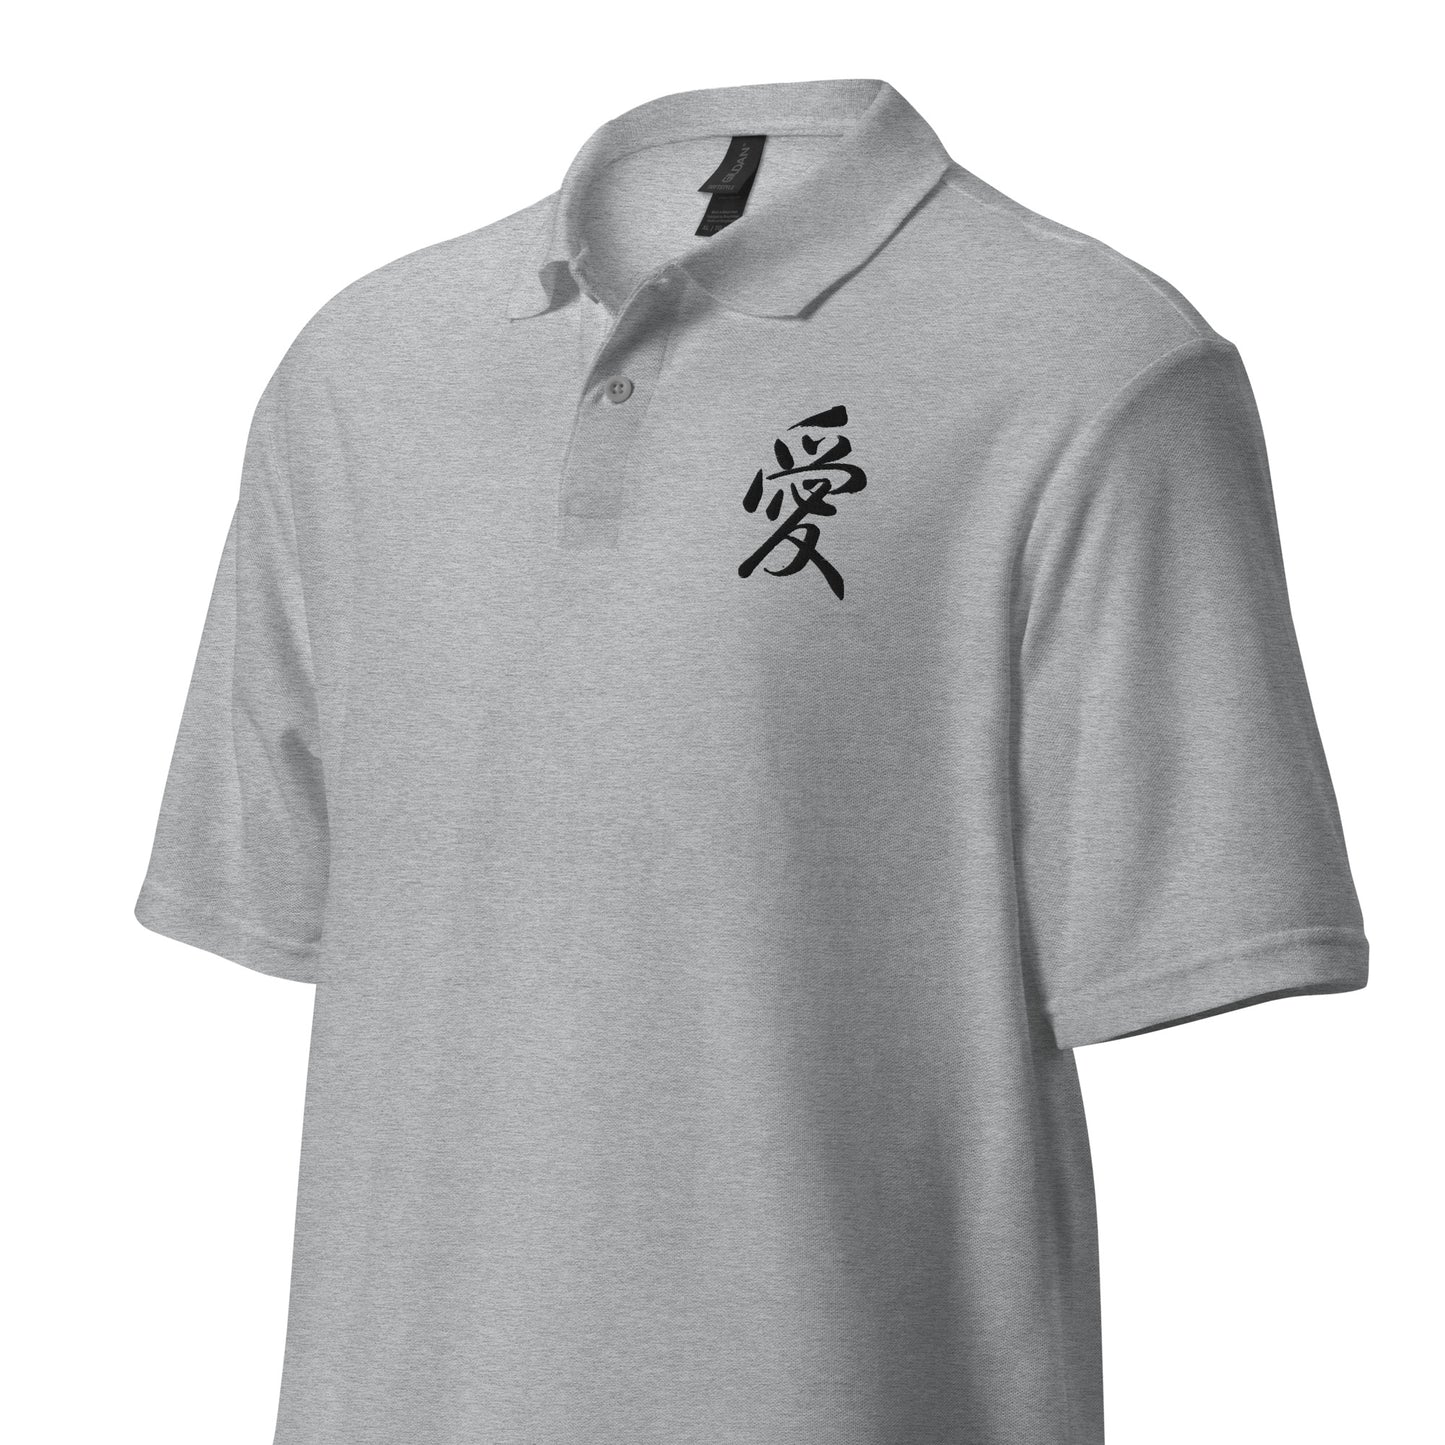 Unisex Embroidered pique polo shirt